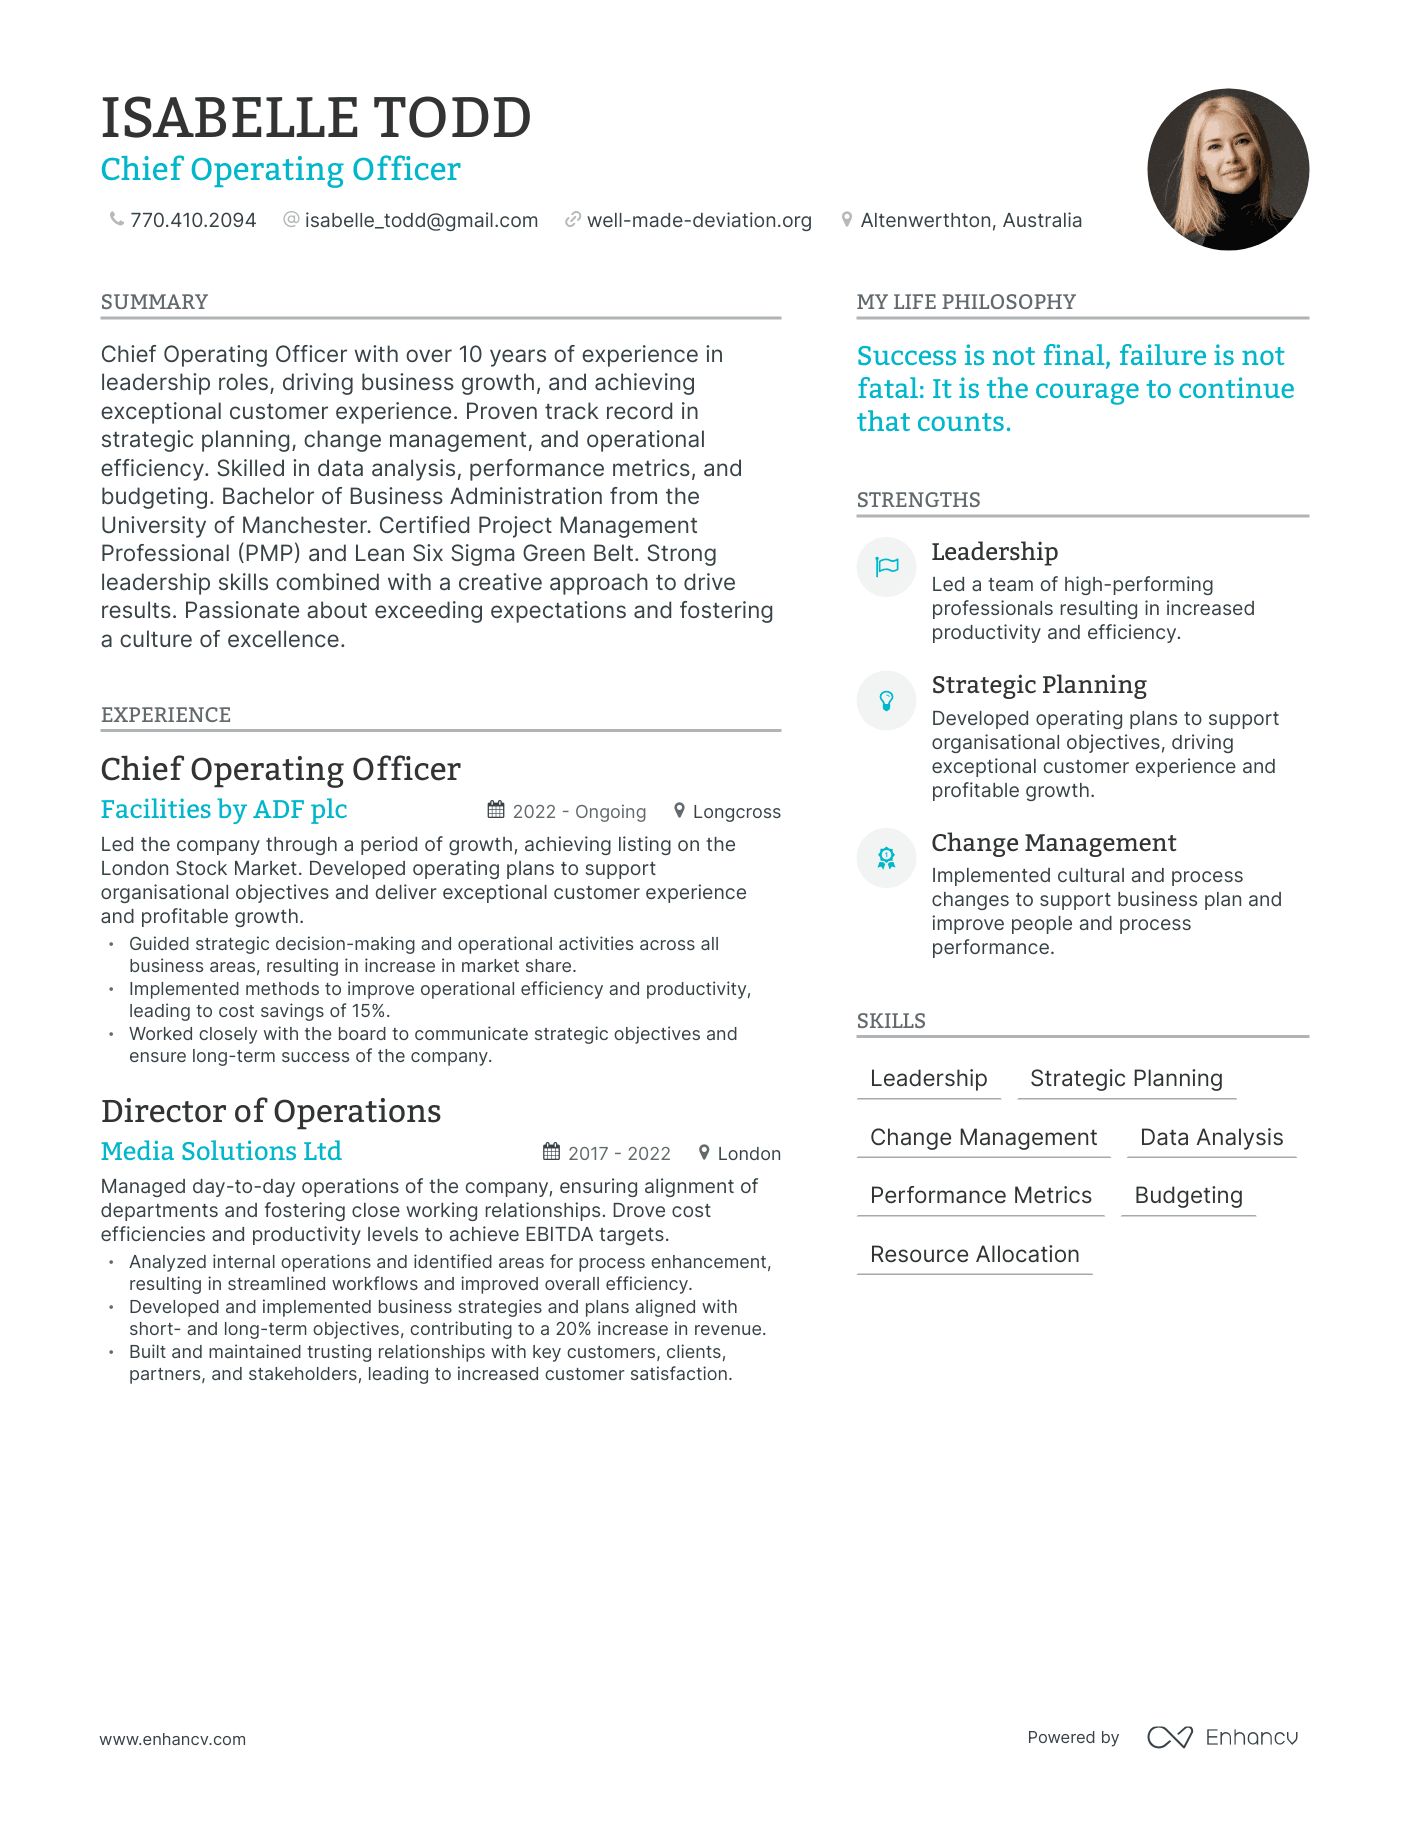 Chief Operating Officer resume example